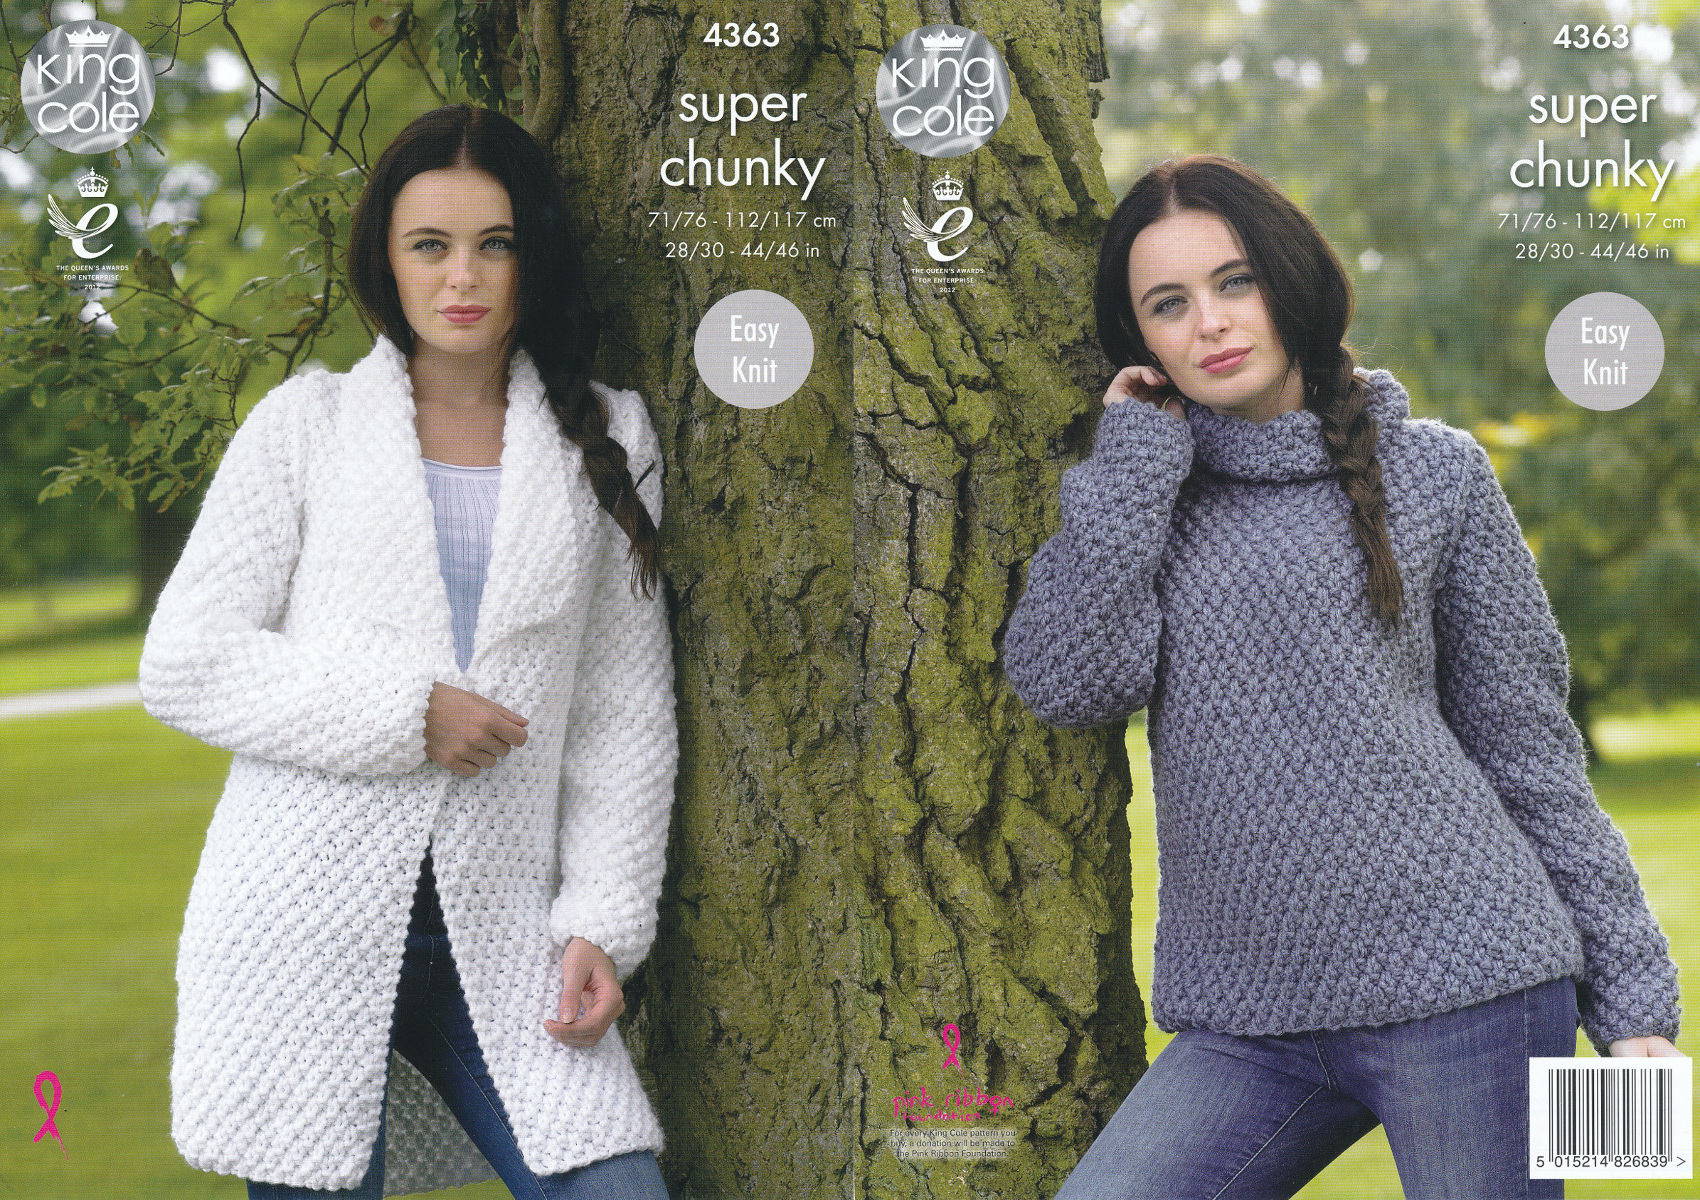 Knitted Coat Patterns Details About Ladies Super Chunky Knitting Pattern King Cole Easy Knit Sweater Jacket 4363